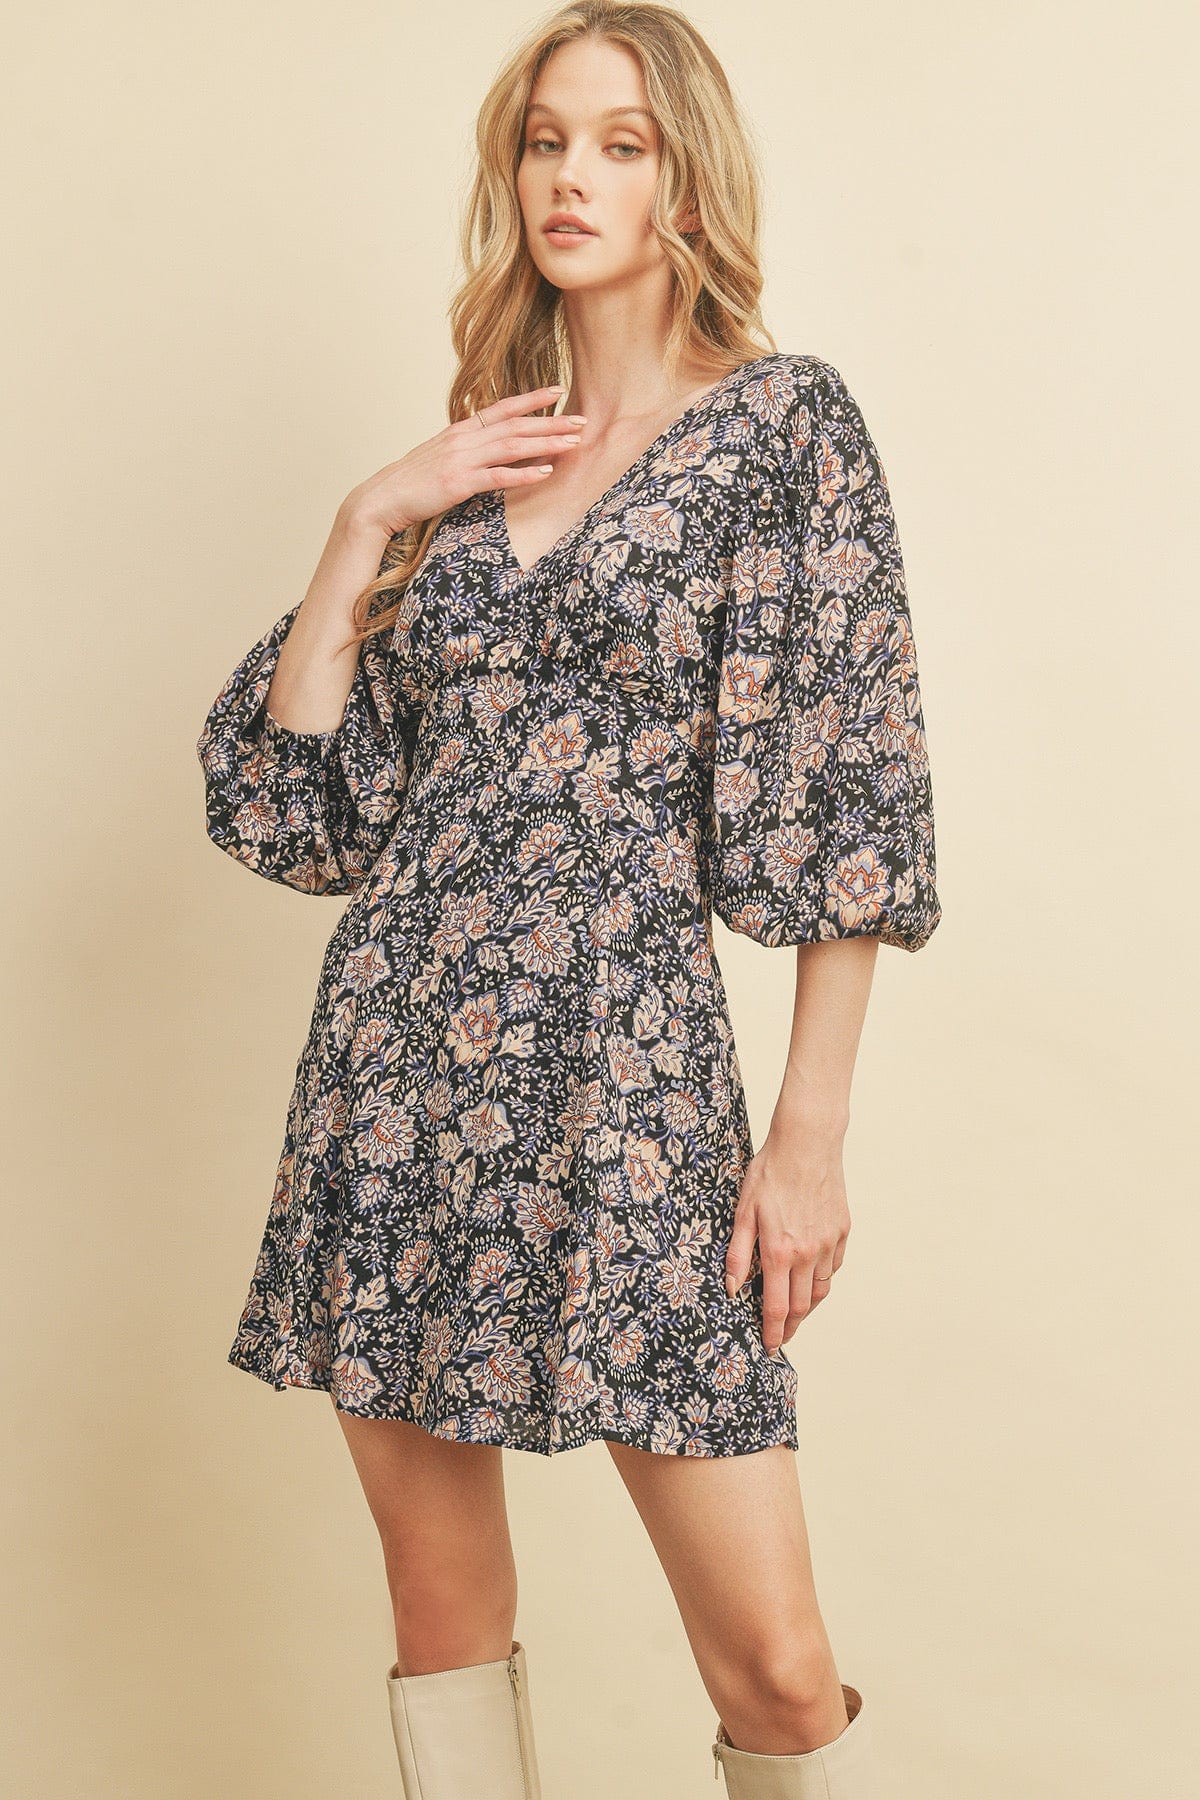 Floral Midi Dress Side Cut Out Brazil Beauty by Sage The Label